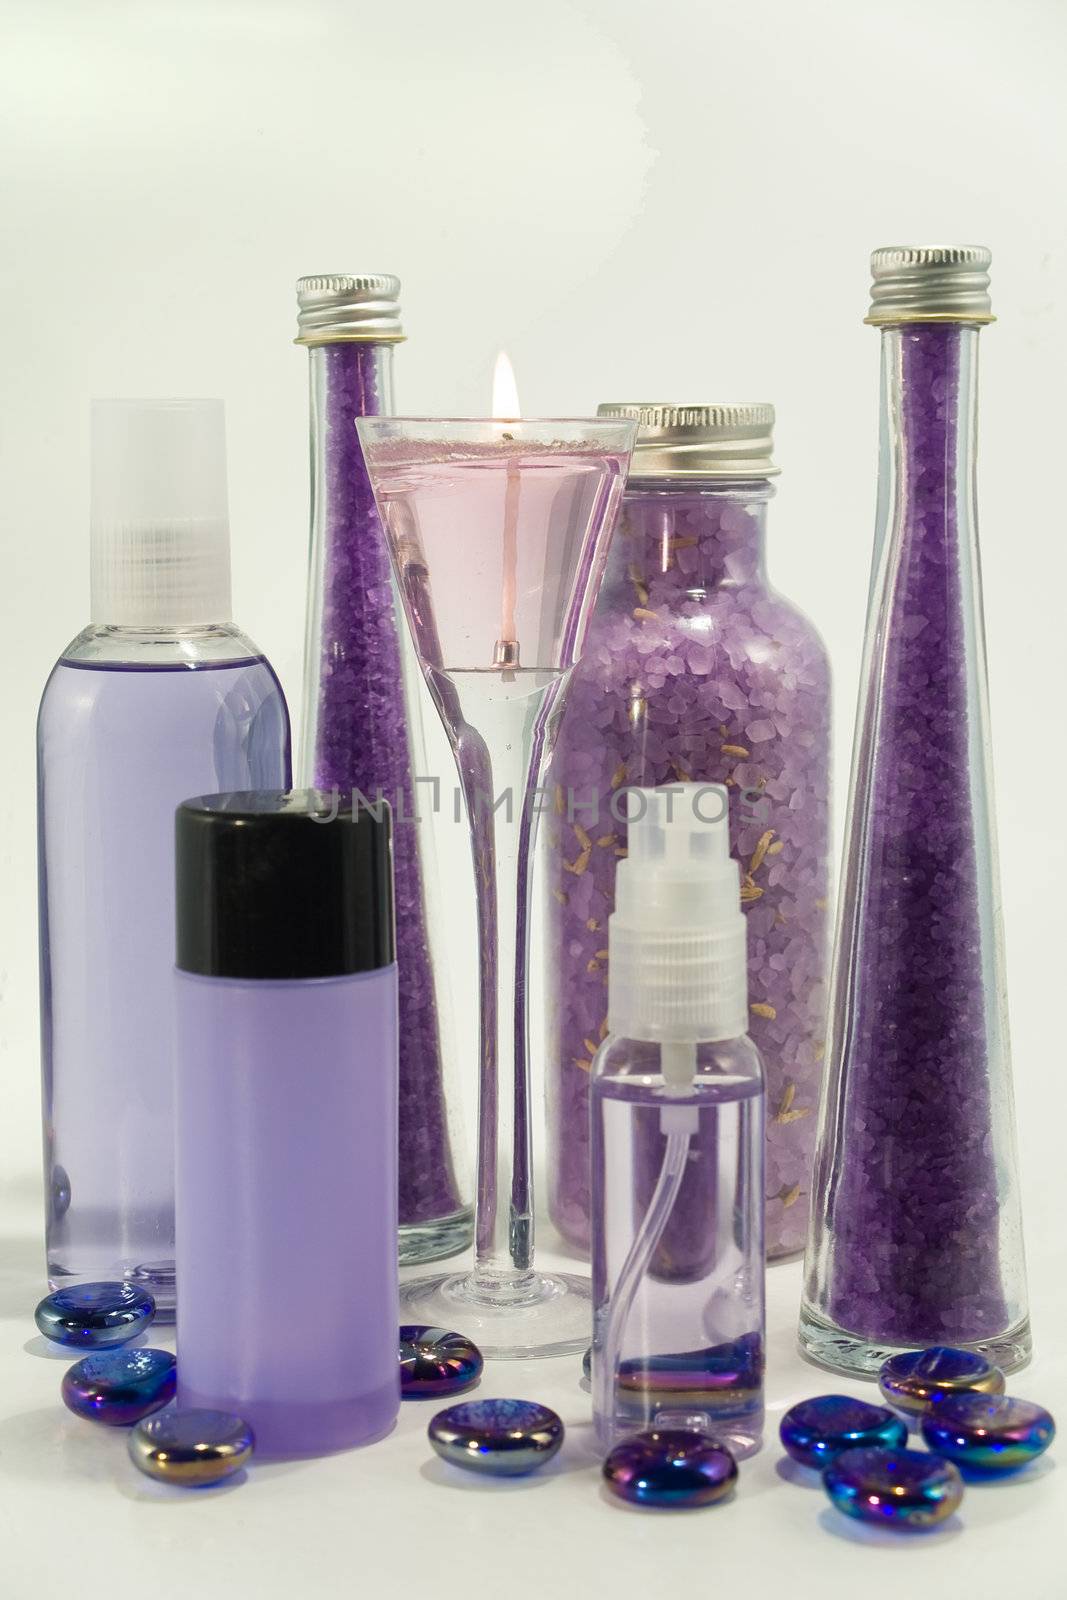 A collection of lavender bath products.